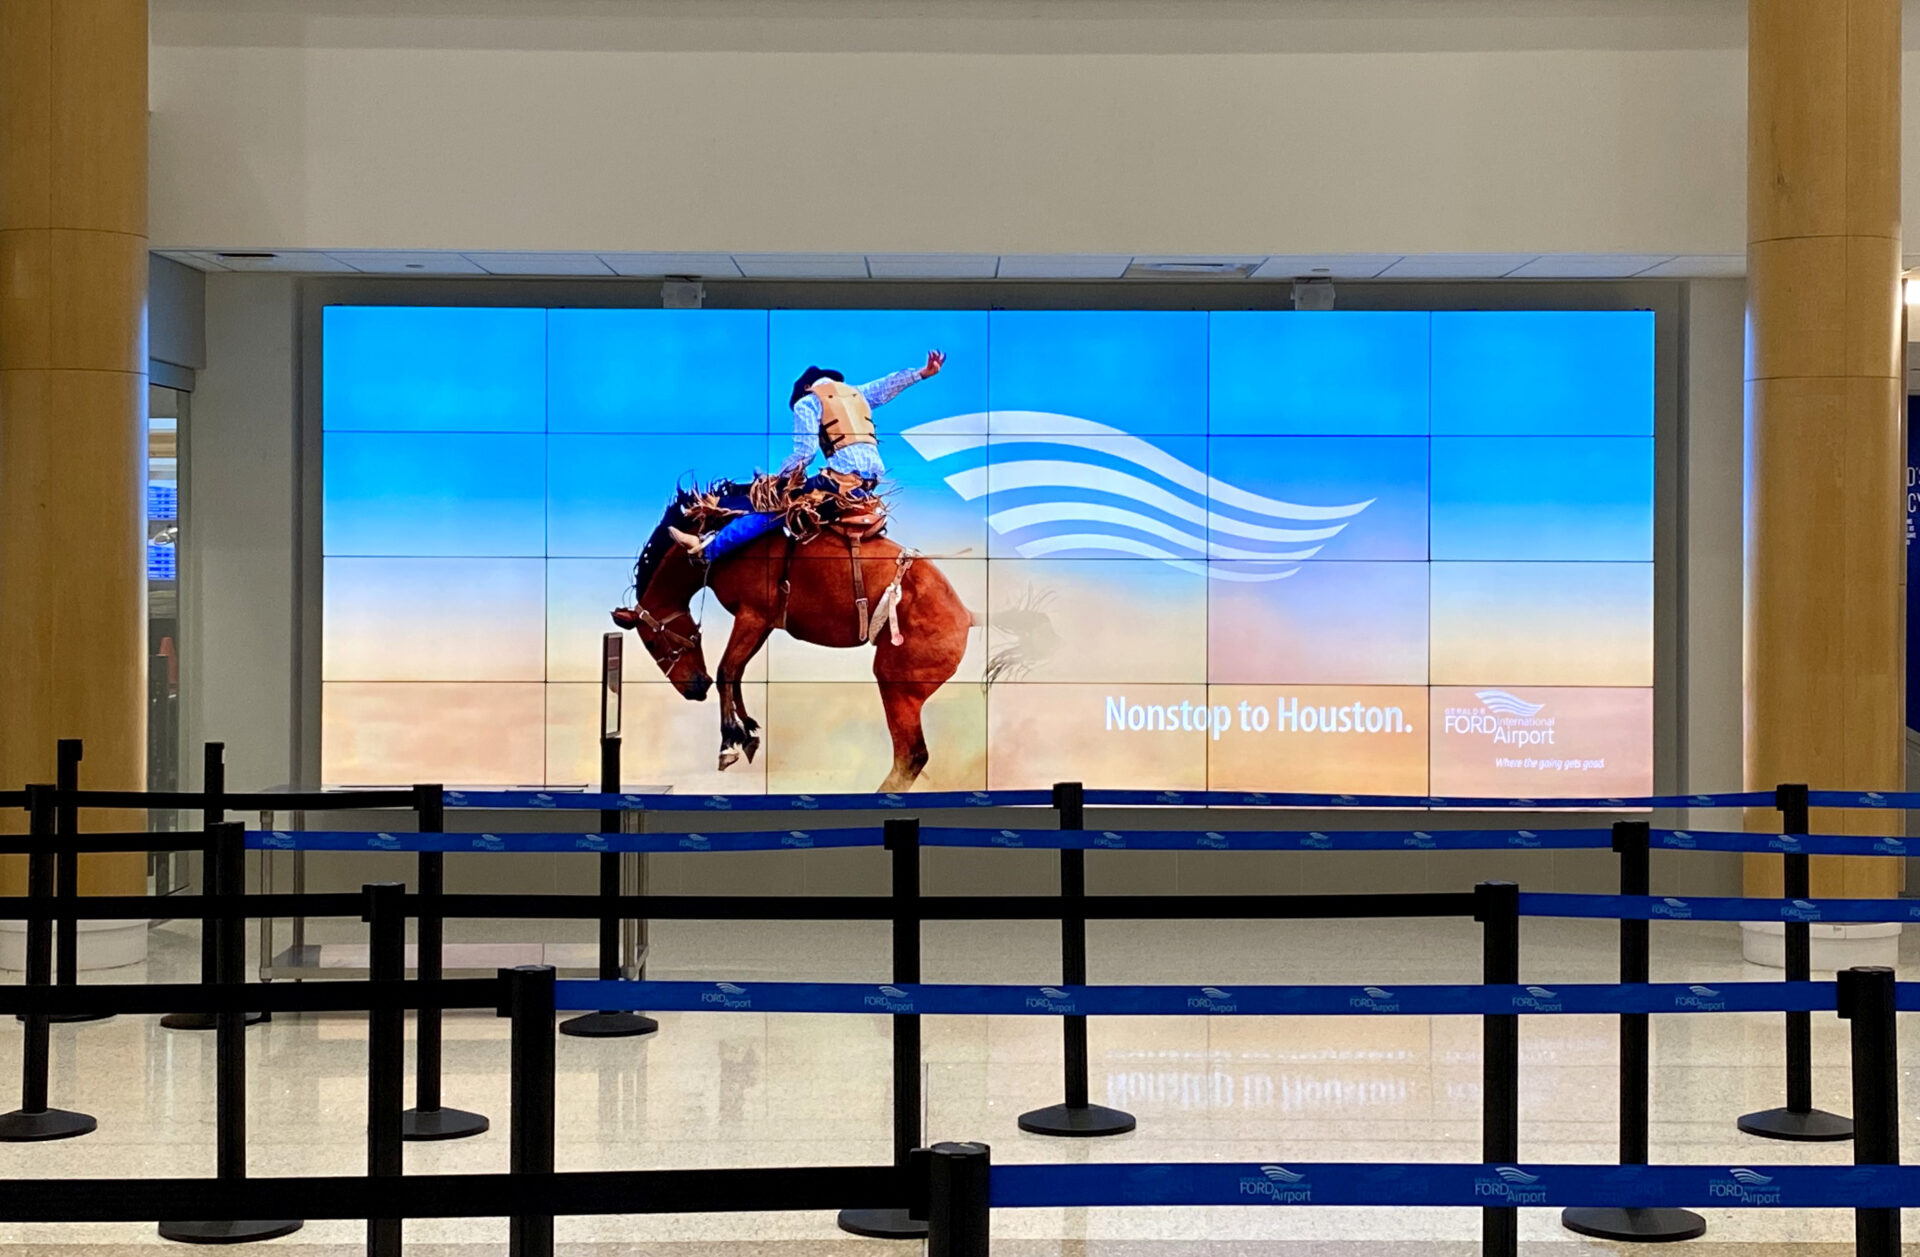 Digital out of home for Gerald R. Ford International Airport. Nonstop to Houston